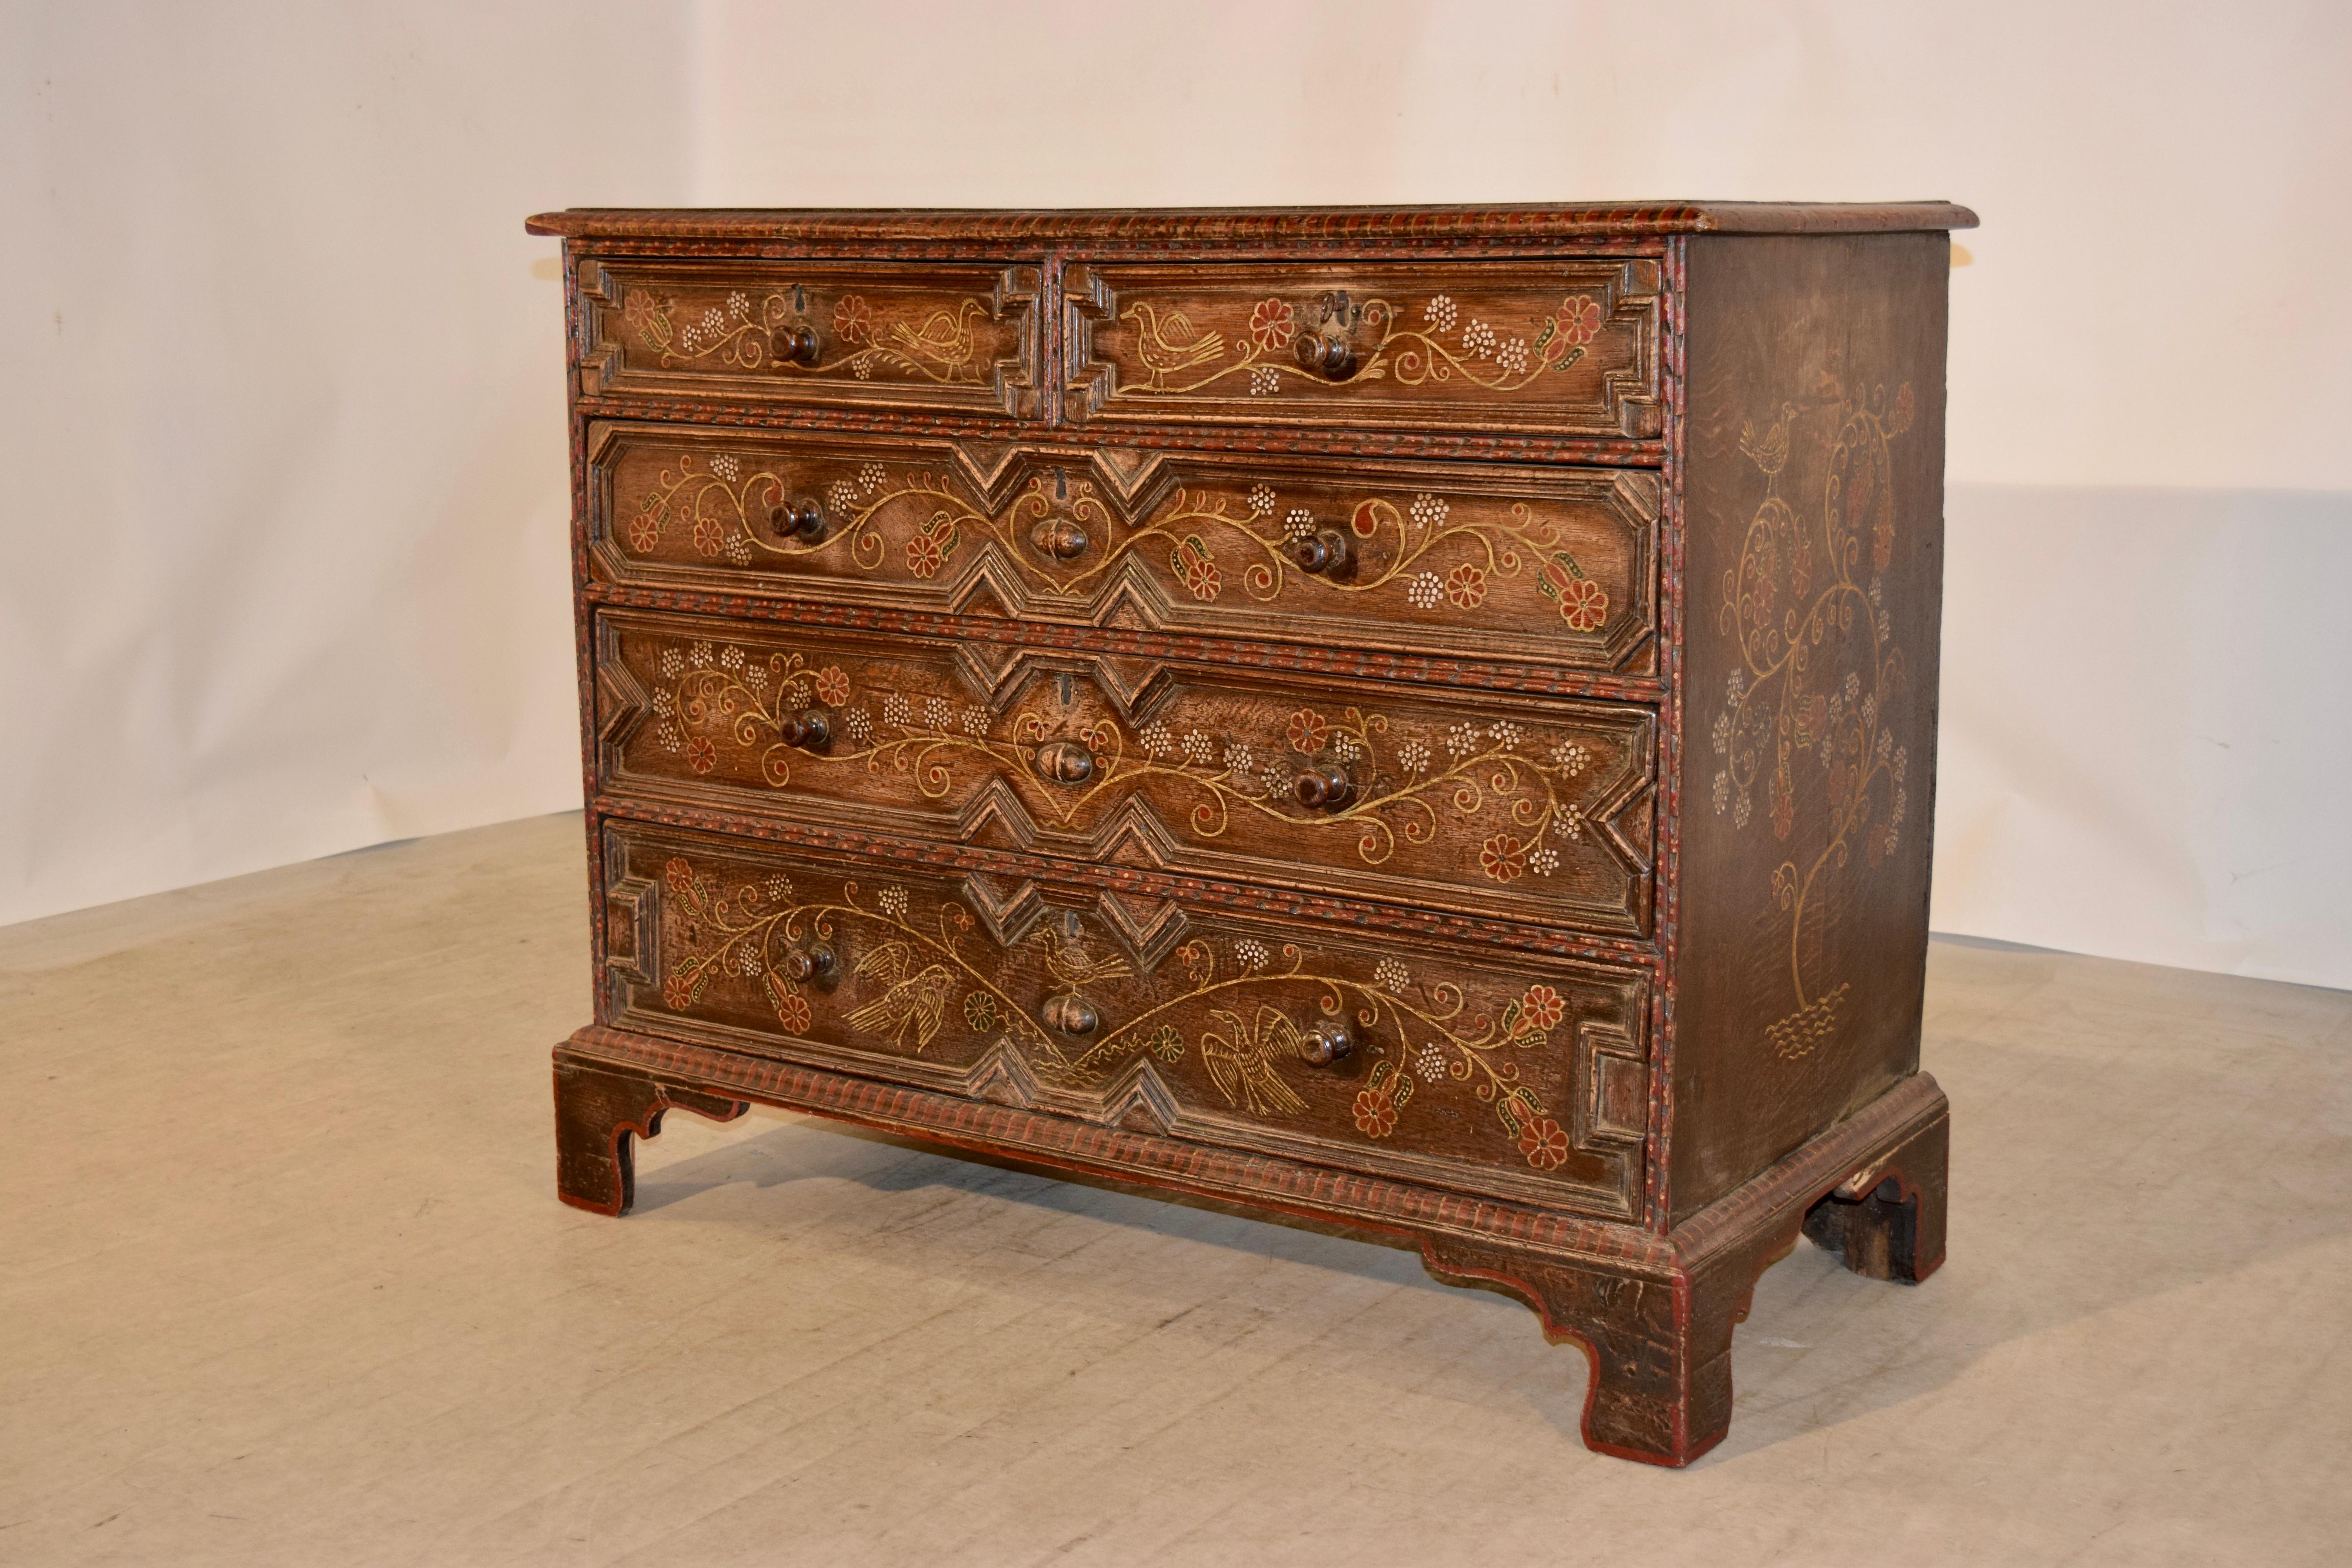 Mid-18th century decorated oak chest from England. The top is made of two planks and has a bevelled edge following down to simple sides and two smaller drawers over three larger drawers, all with geometric raised drawer fronts and supported on